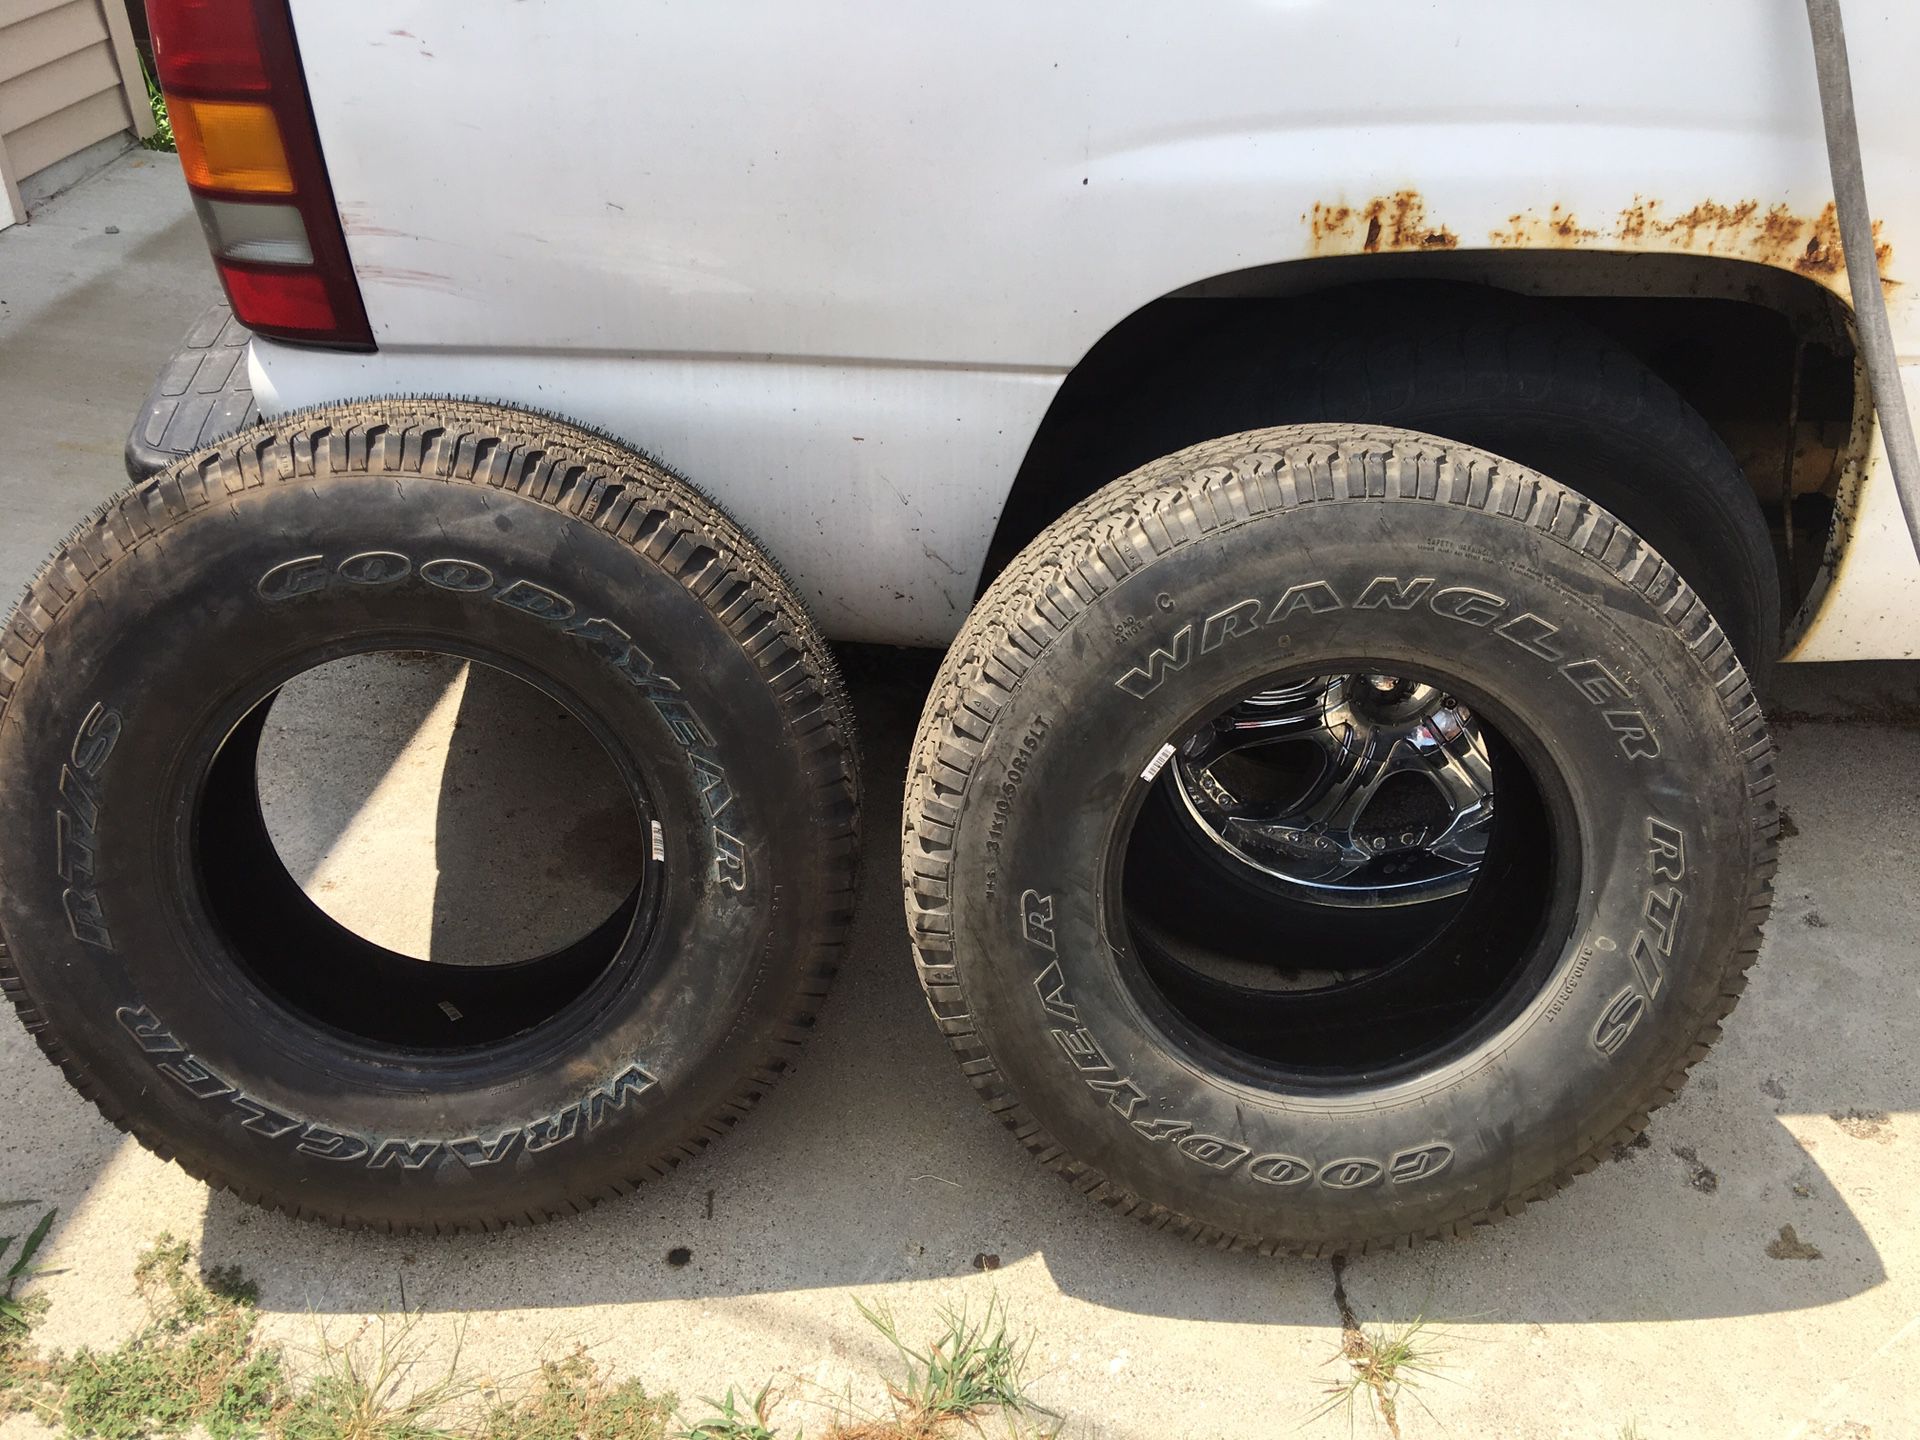  Goodyear Wrangler RTS tires Brand New for Sale in Oak Lawn, IL  - OfferUp